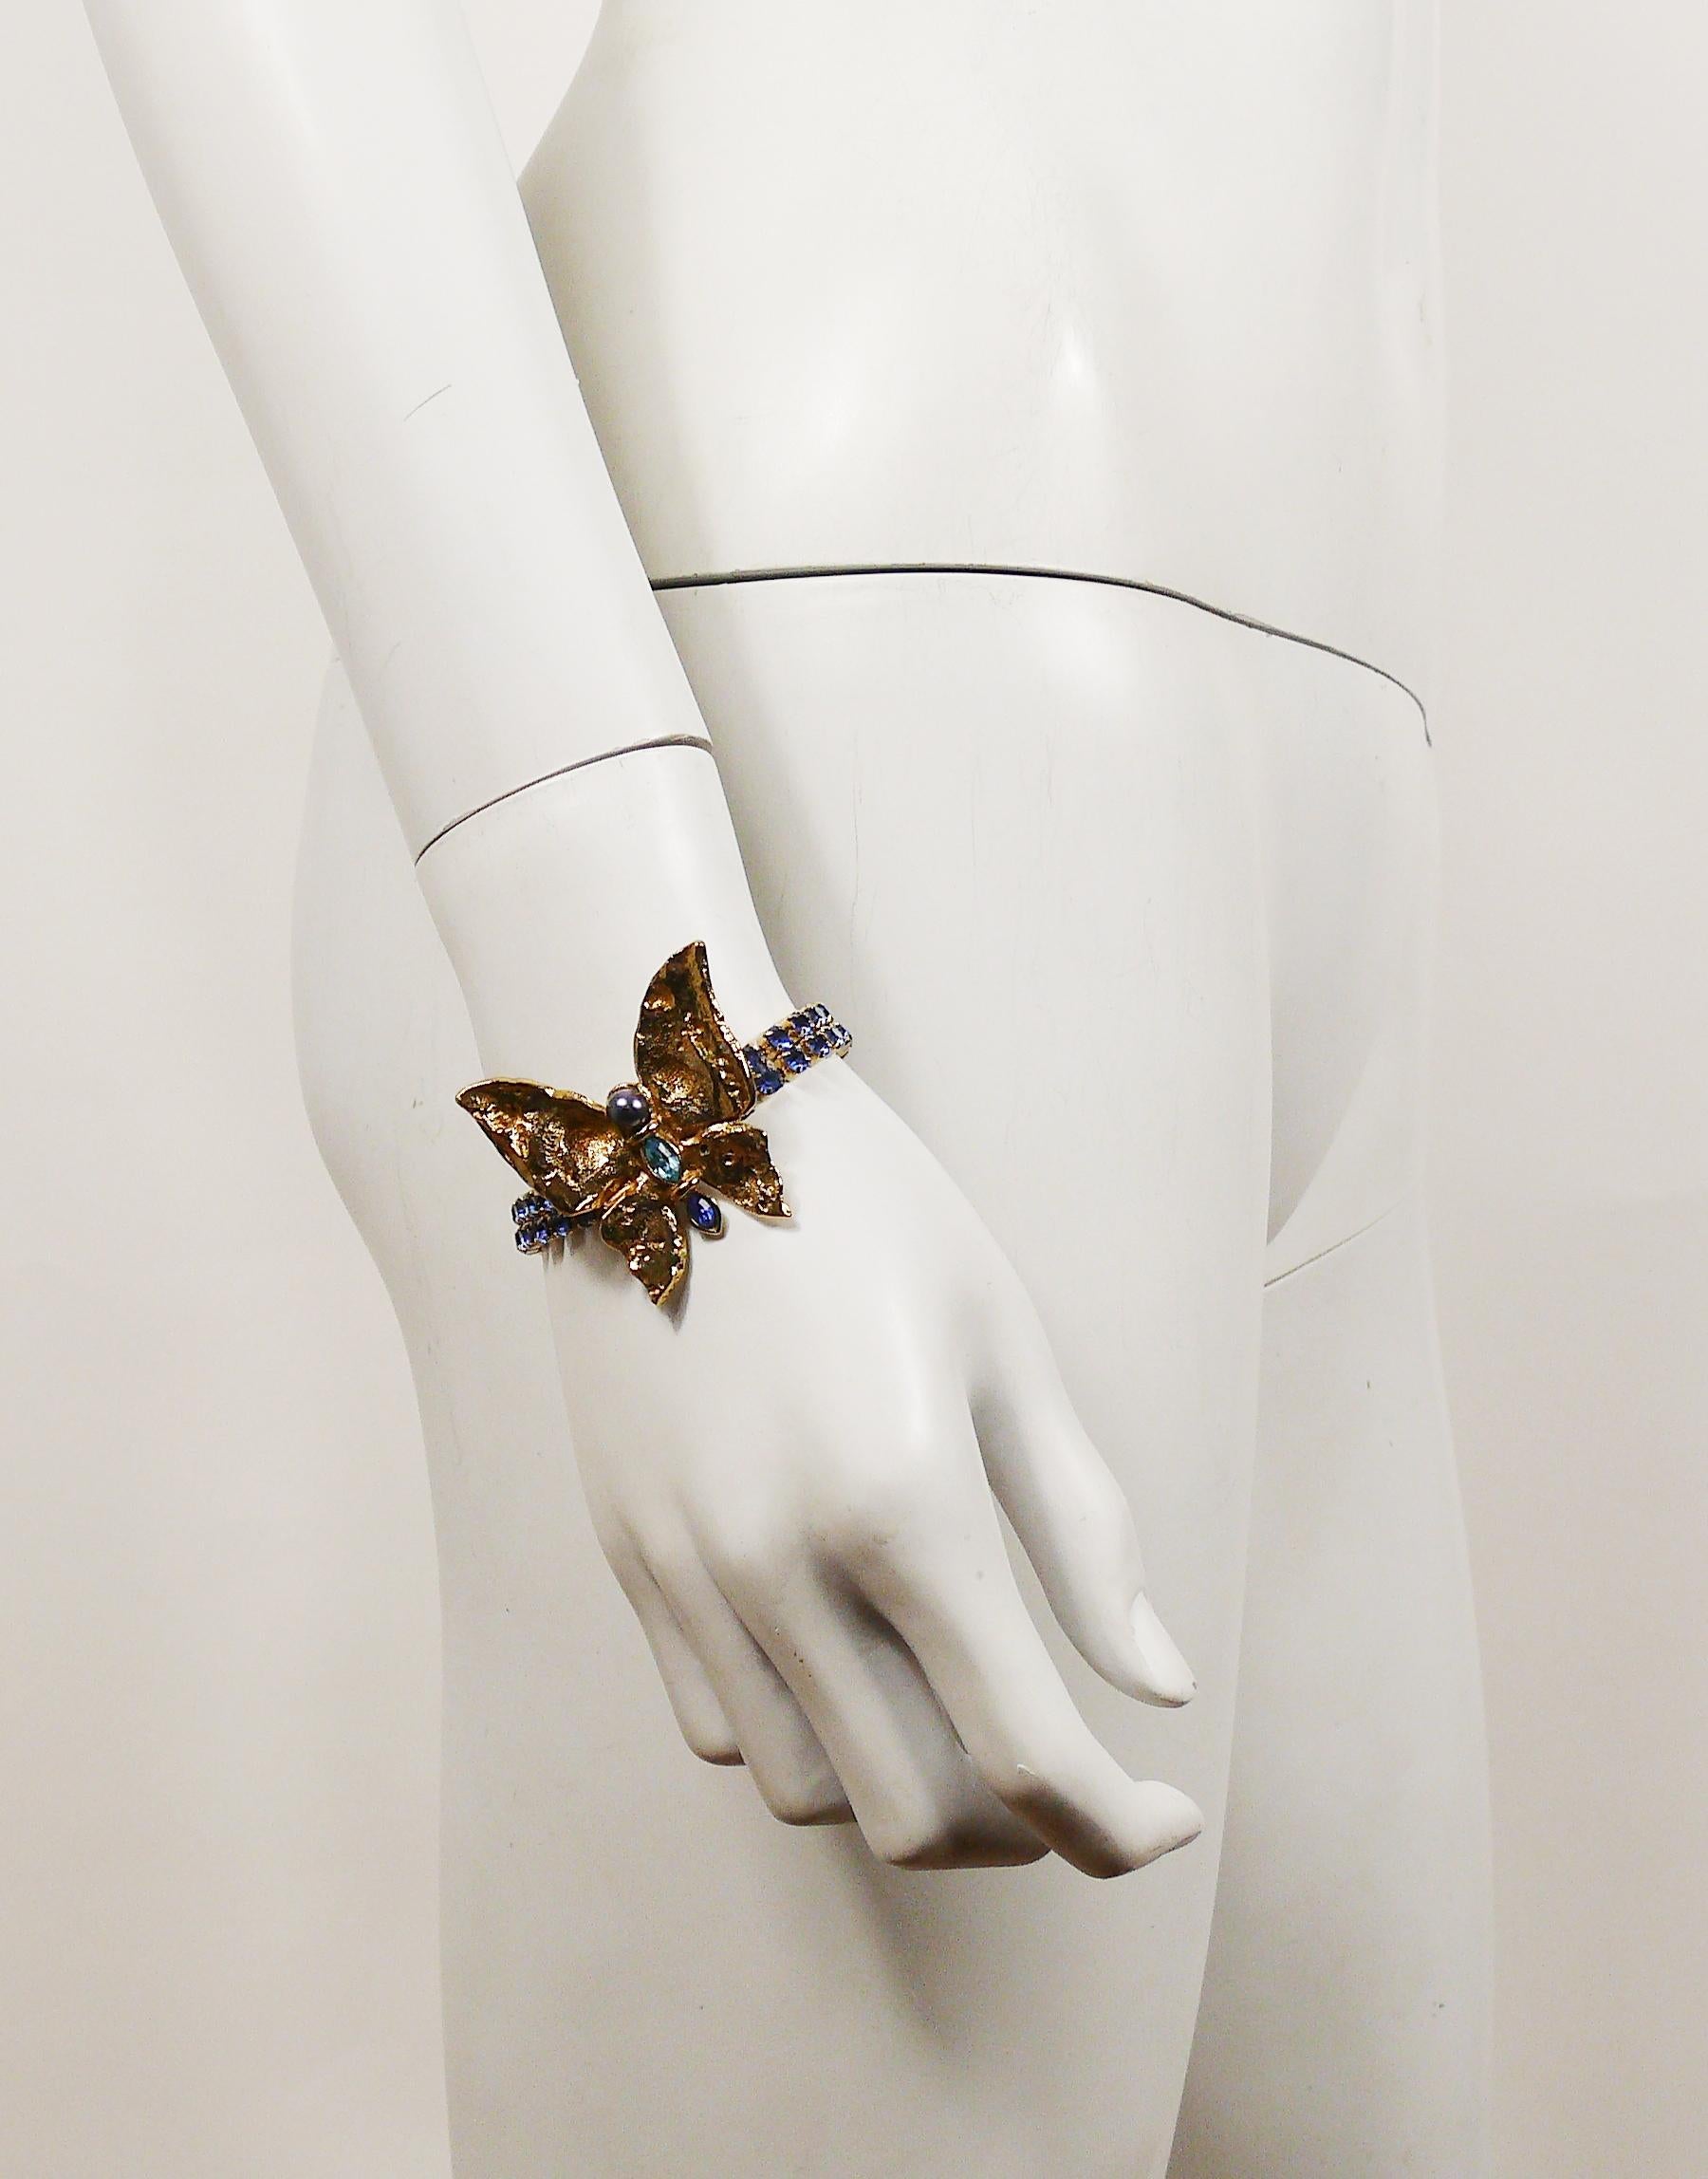 YVES SAINT LAURENT vintage textured gold toned butterfly bracelet embellished with blue faux pearl, sapphire and aqua rhinestones.

Embossed YSL Made in France.

Indicative measurements : length approx. 17.3 cm (6.81 inches) / butterfly max. height